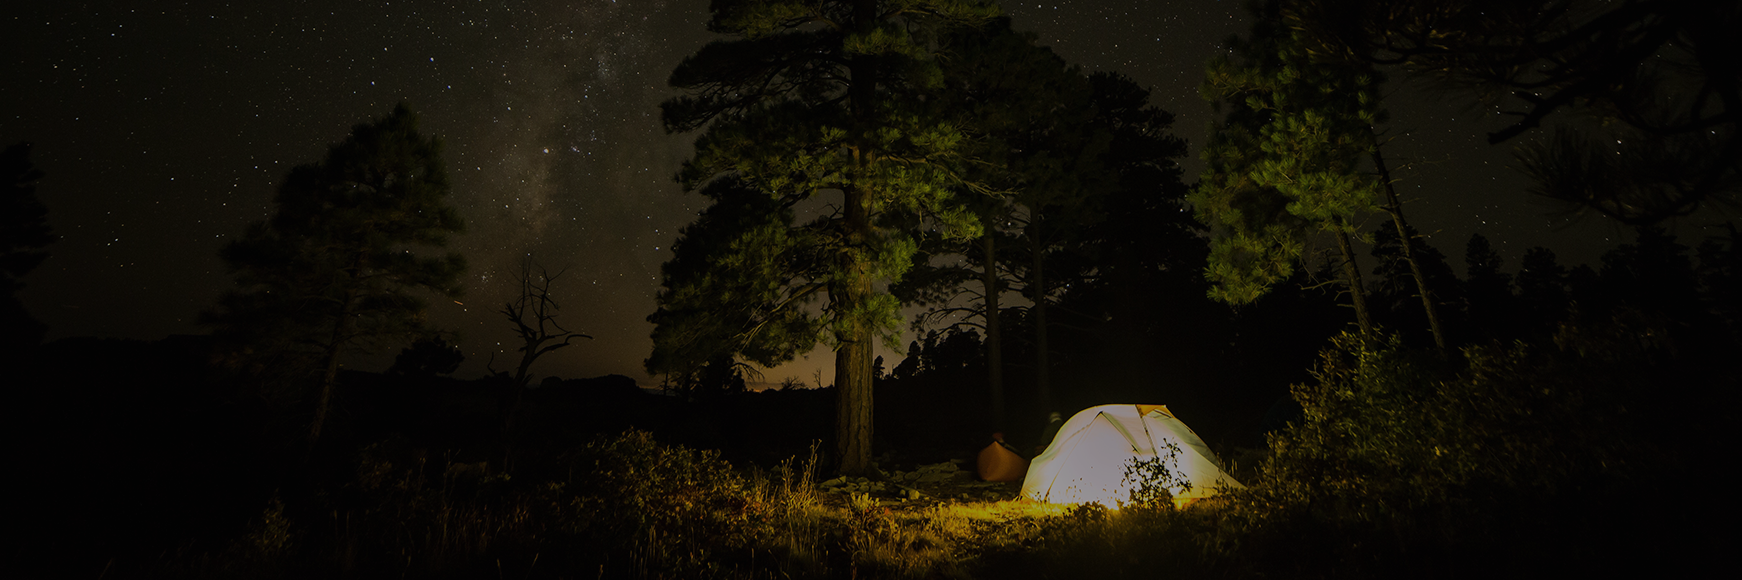 Three cool campsites for kids banner image